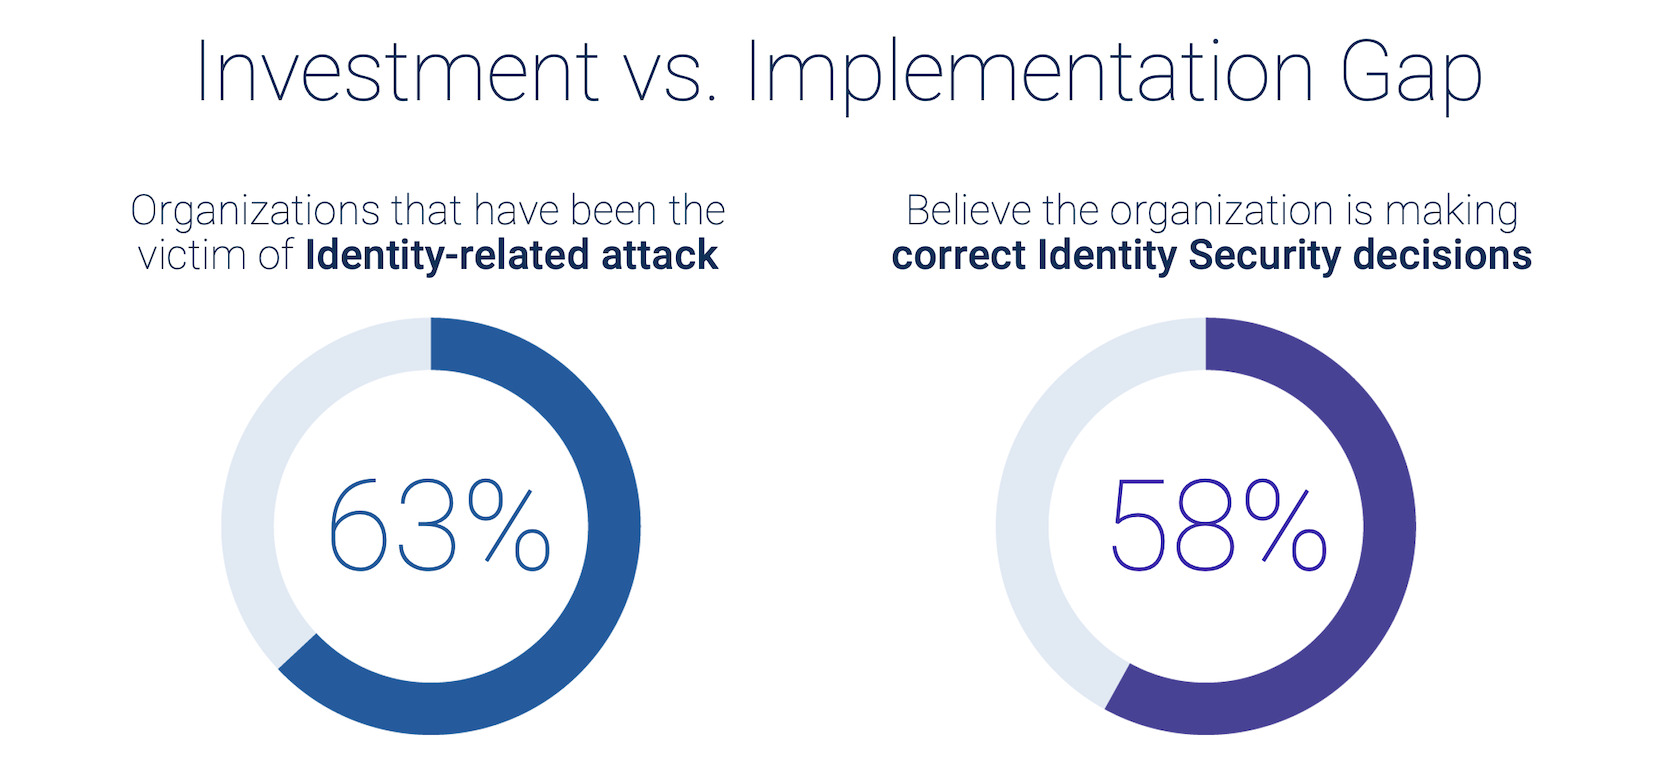 Identity Security and the investment vs. implementation gap